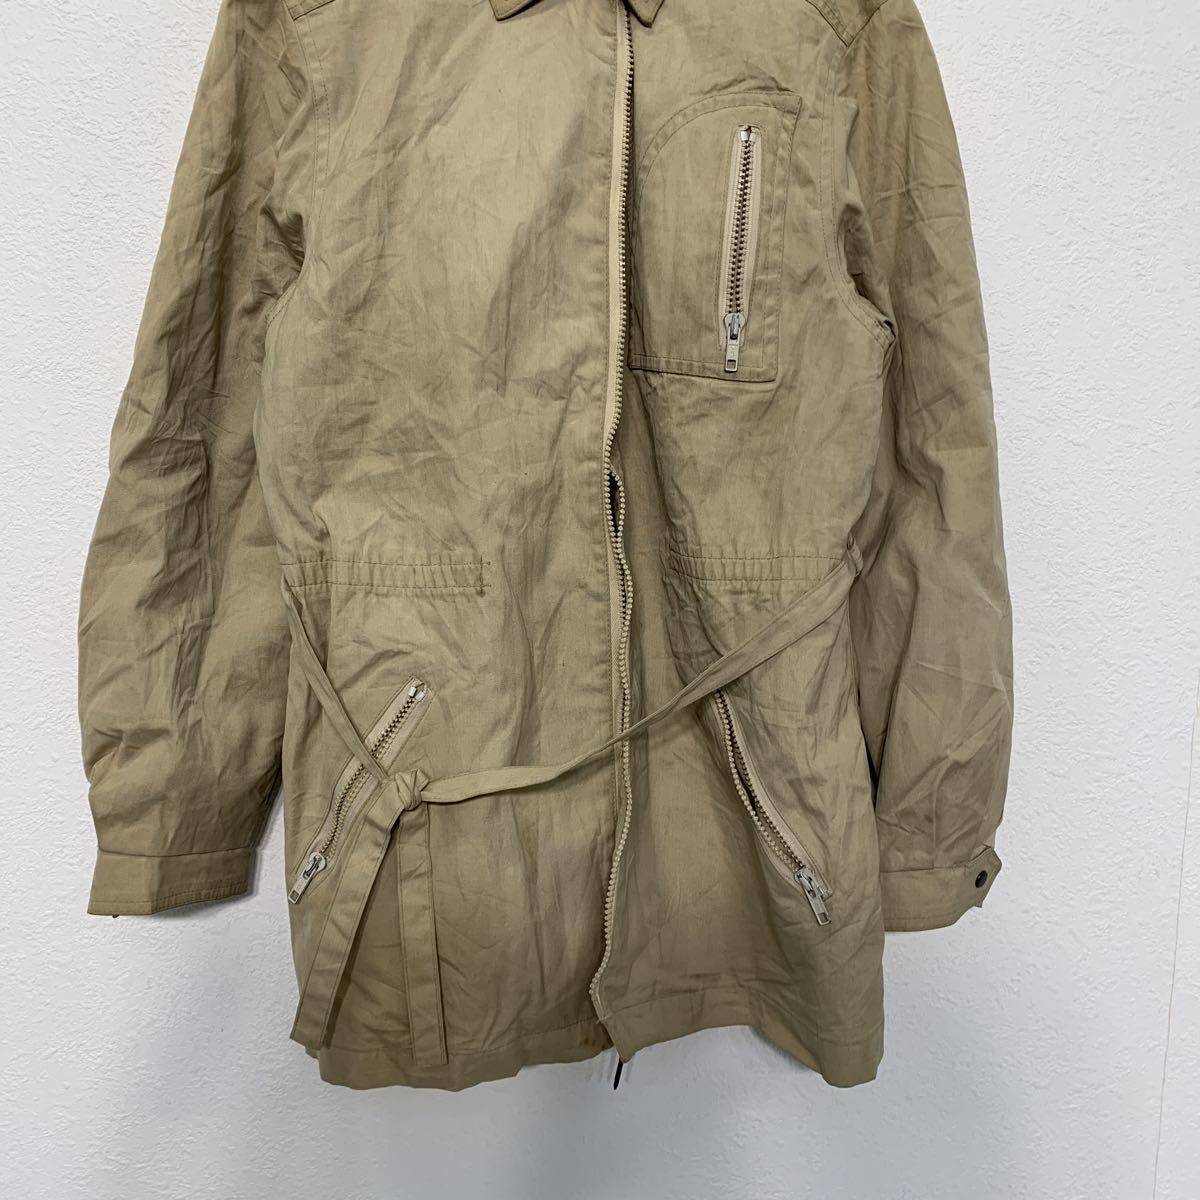  used old clothes LONDON FOG short coat S rank beige London foglamp lady's liner attaching old clothes . America buying up a509-6255